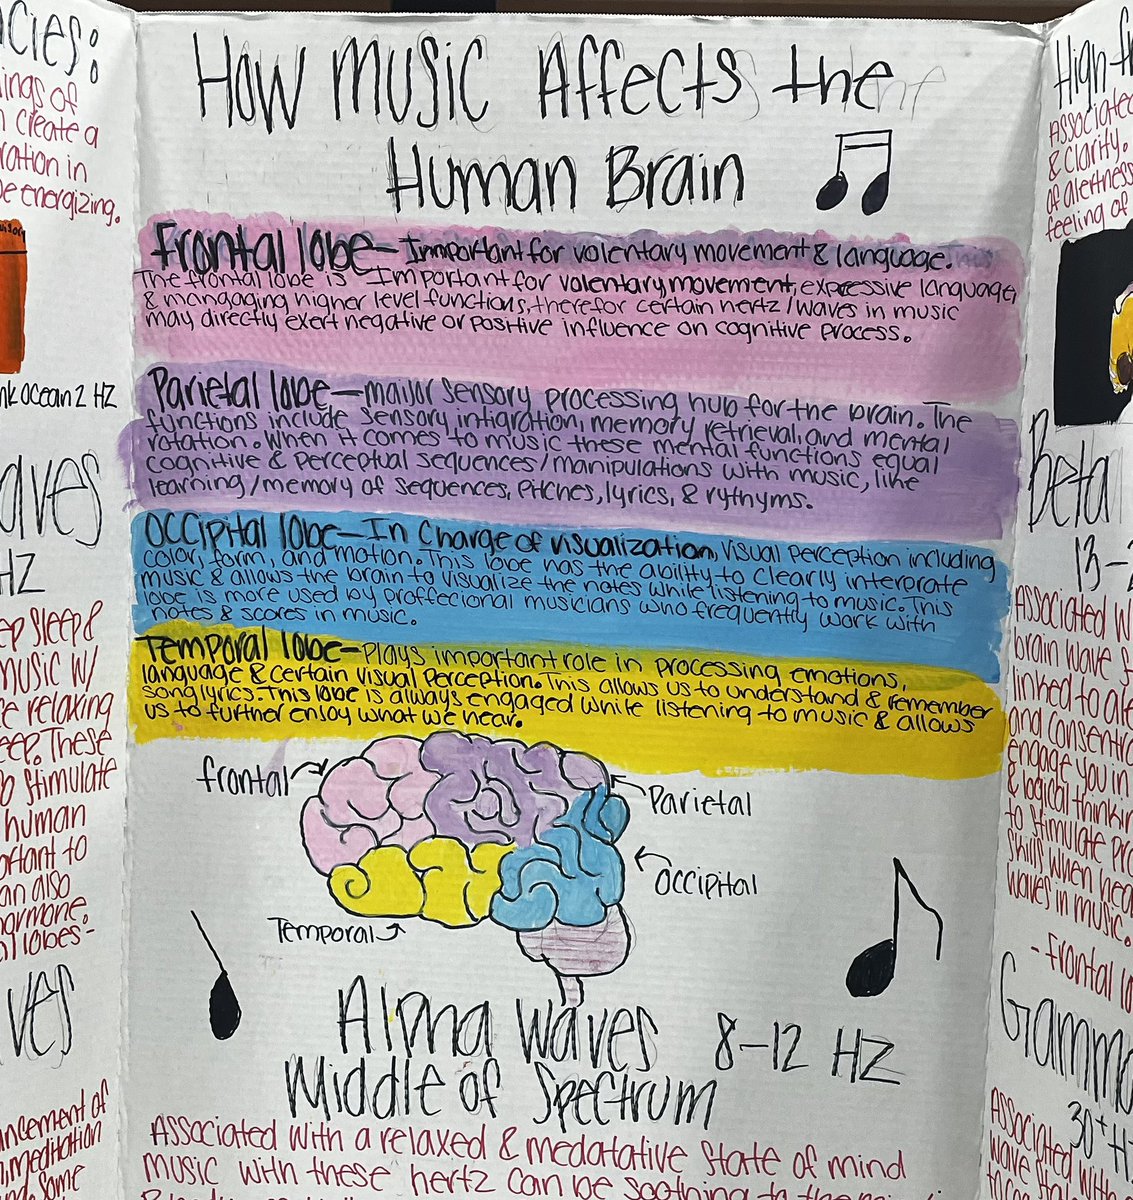 RCSHS Passion Projects sparking joy and excitement for the arts. Topics on creativity, the guitar and science, and how music affects the brain. So many great ideas!!! 🎼🎤🎨🖌️@KedcARTS @KEDC1 @RCSHSOffices @rcshsGreenhill @Ms_April_Adkins #rcLEAD #Arts2KYED